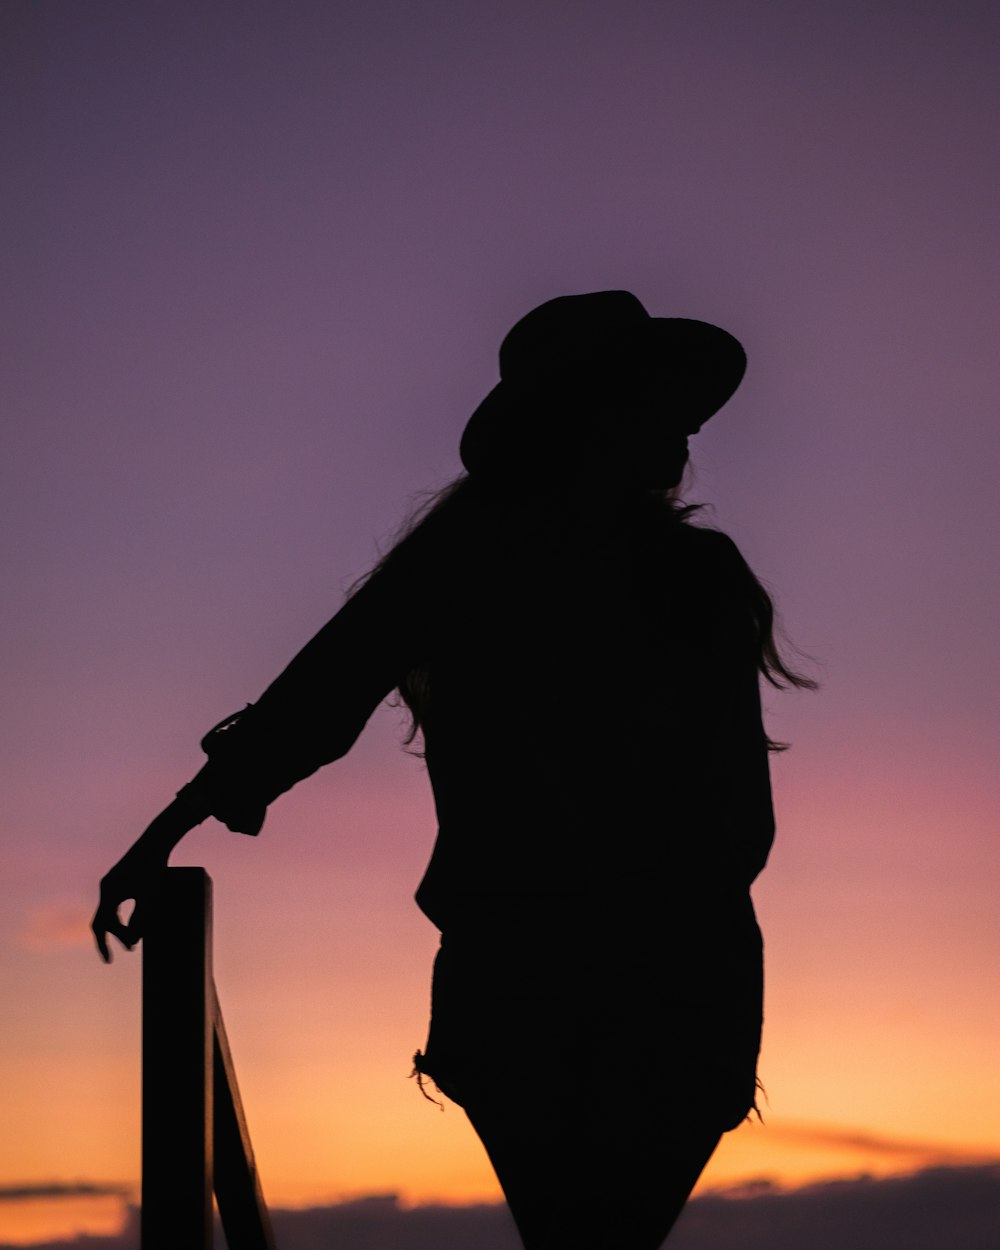 a silhouette of a person wearing a hat